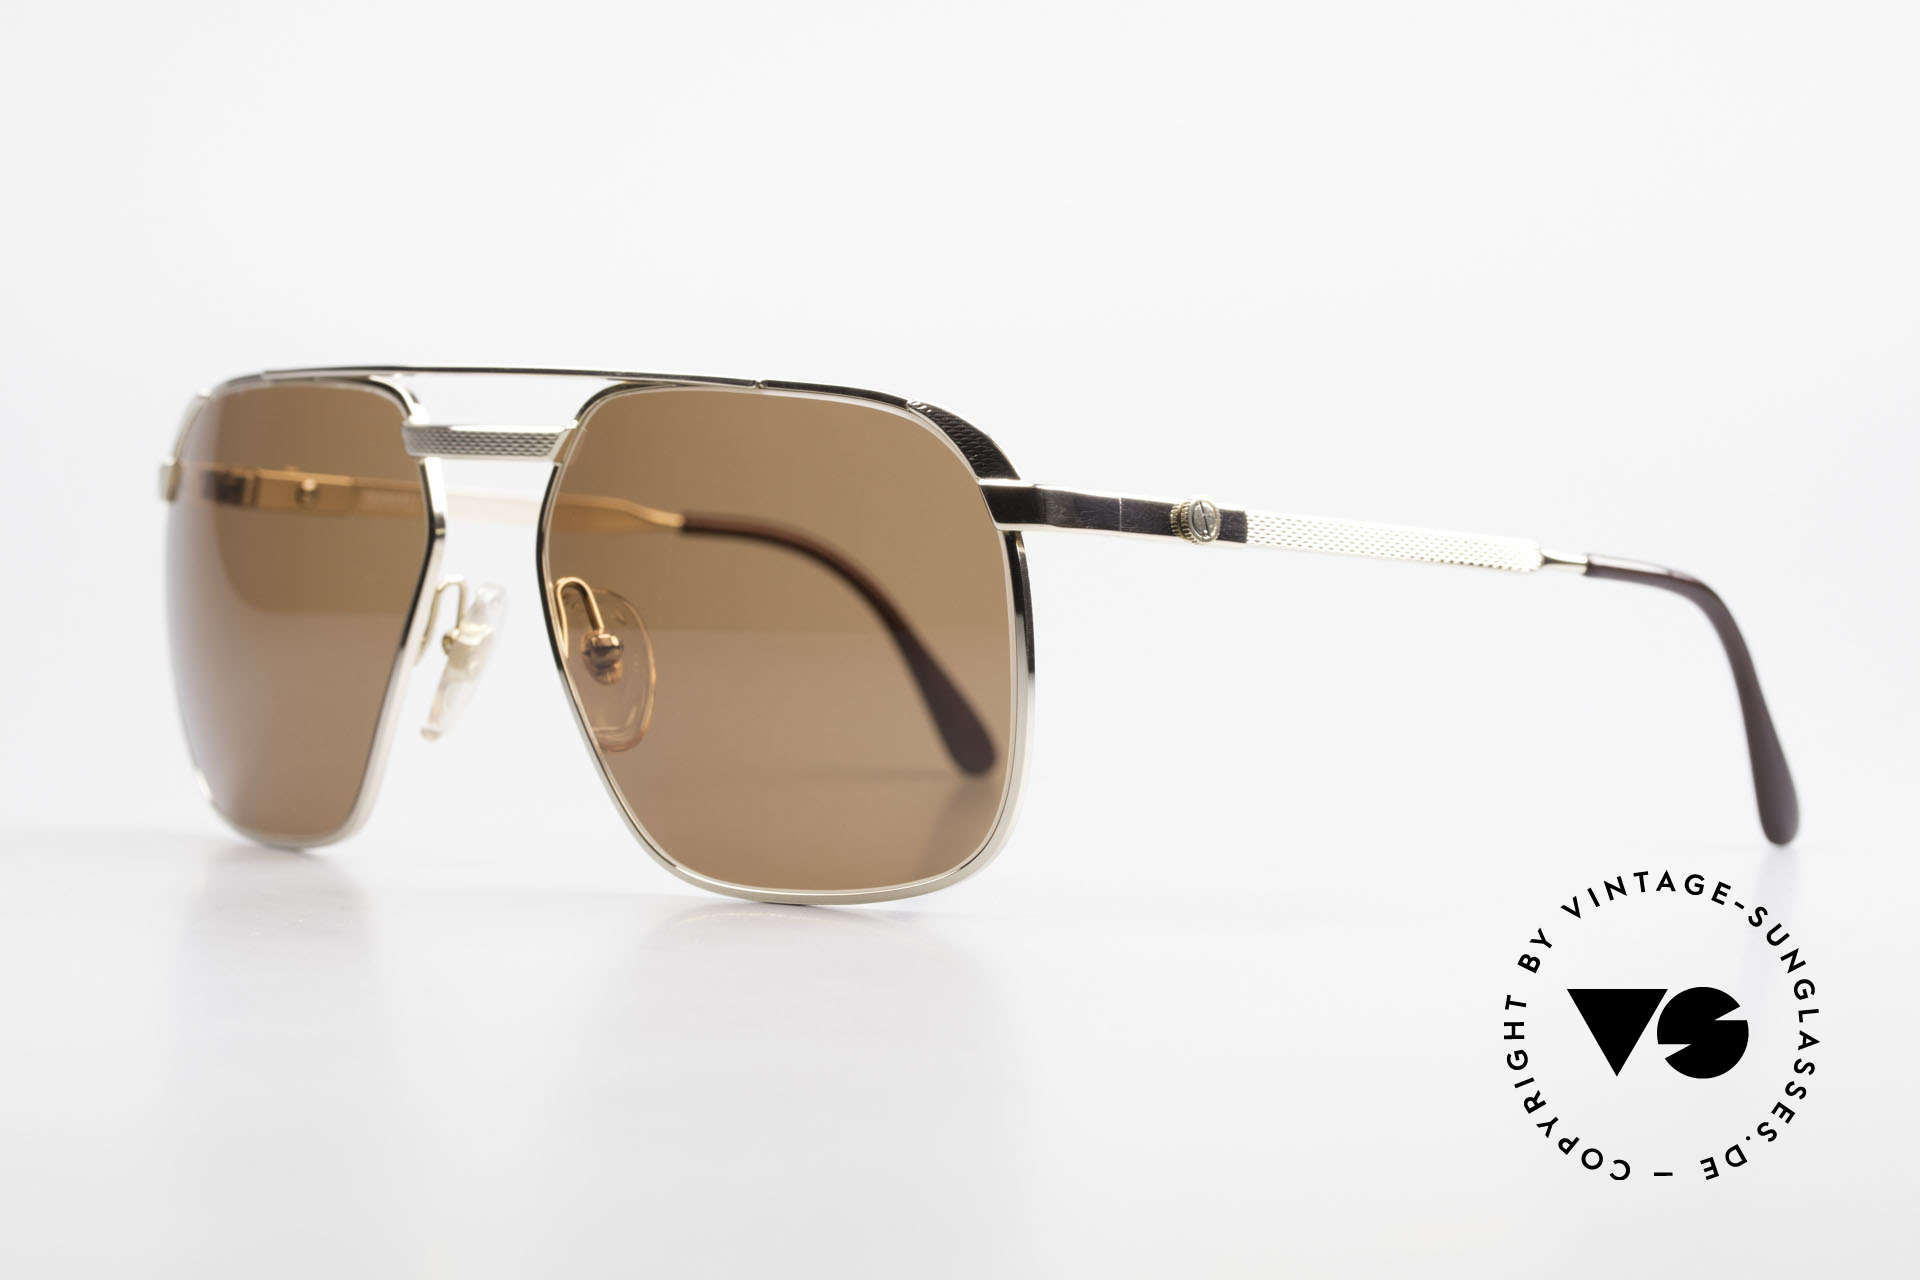 Dunhill 6011 Gold Plated Sunglasses 80's, costly, GOLD-PLATED frame in MEDIUM size 59-17, 130, Made for Men